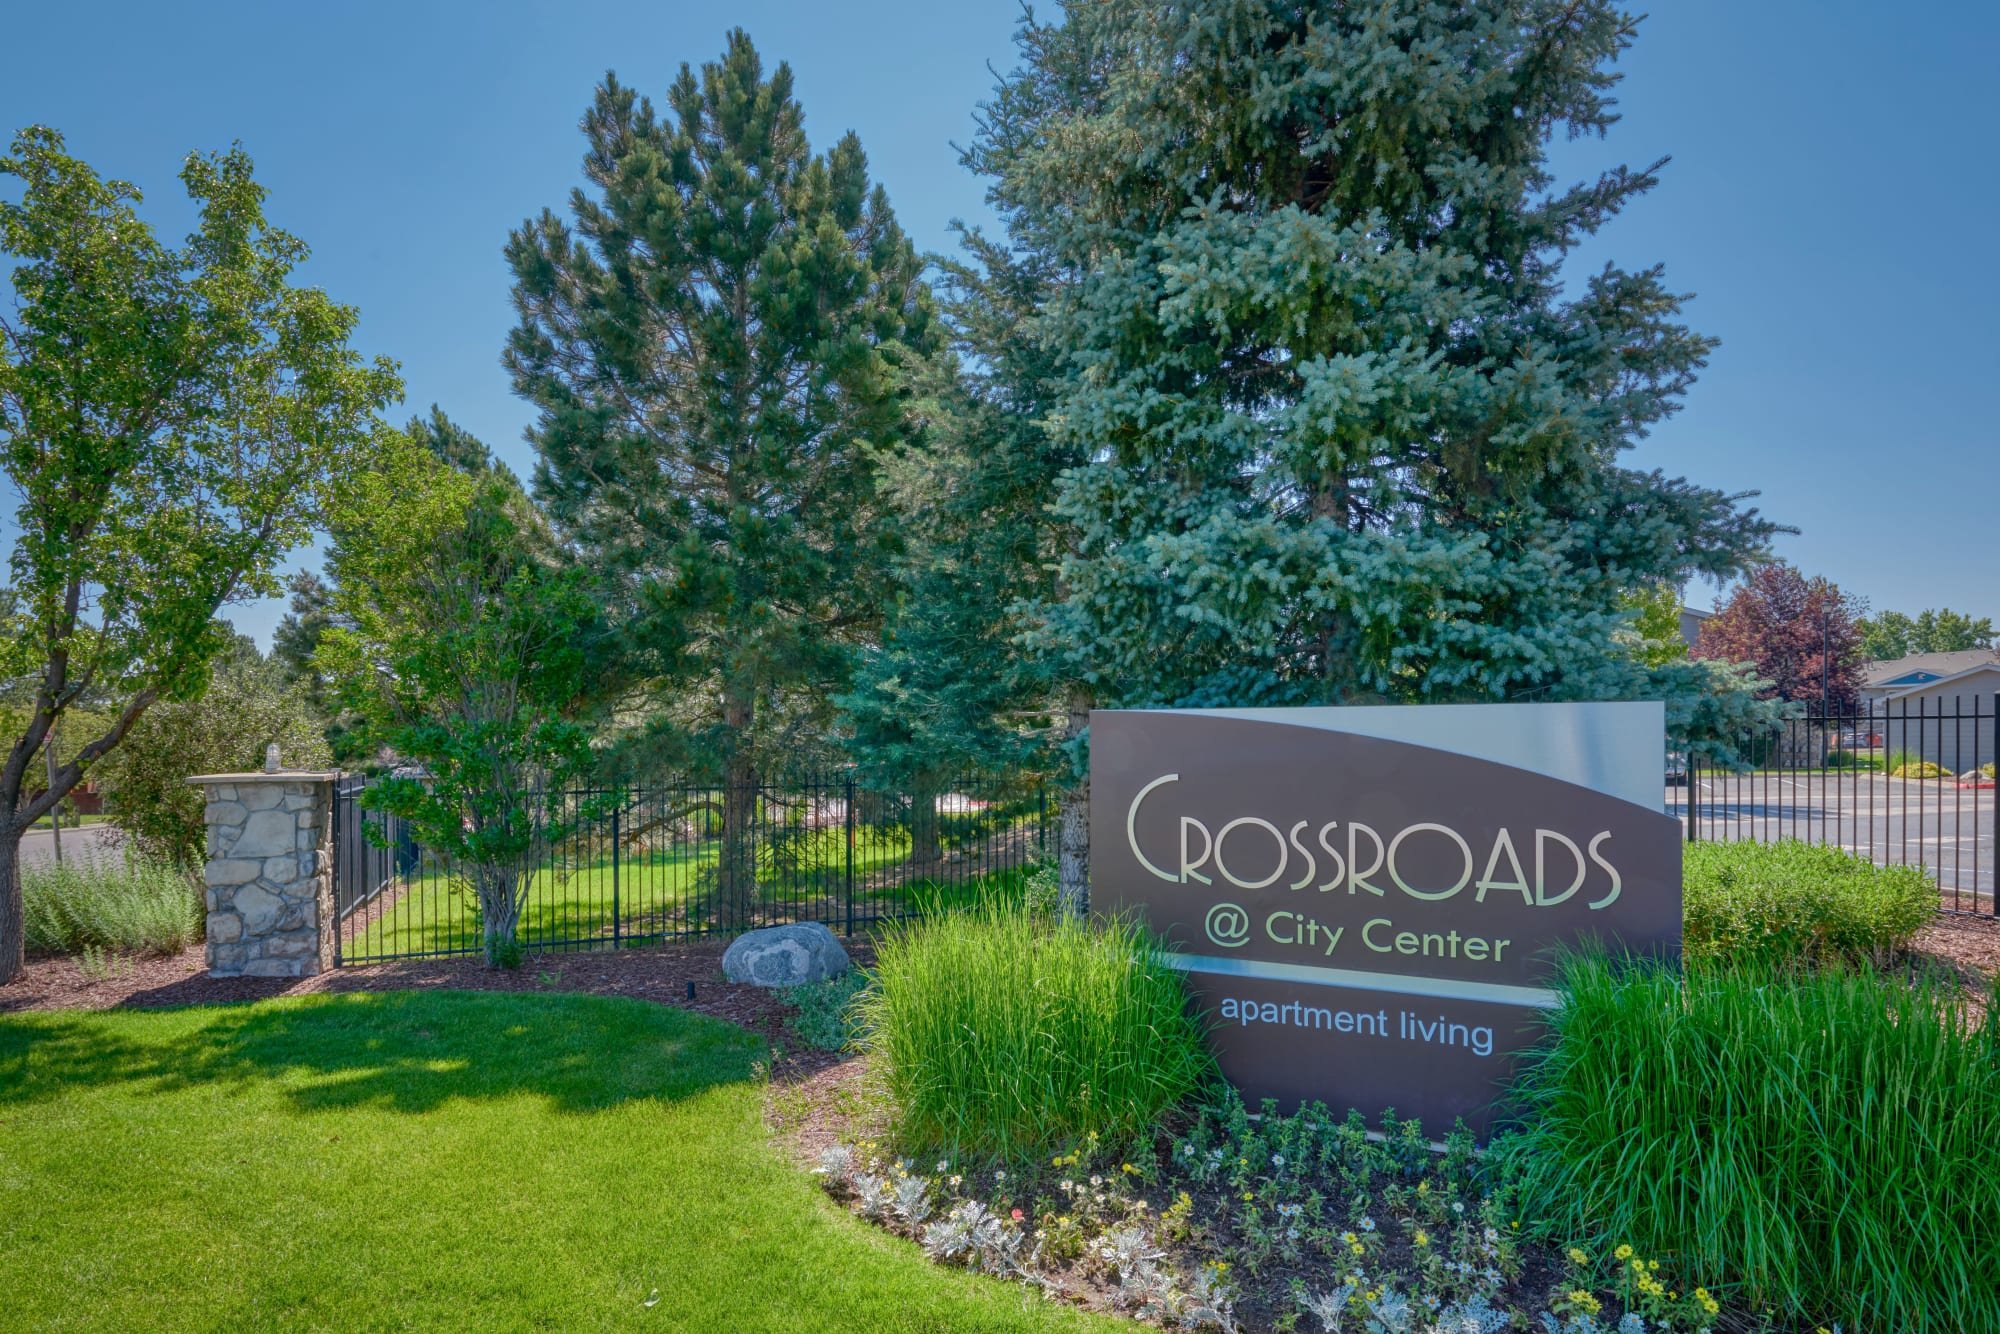 The monument sign at Crossroads at City Center Apartments in Aurora, Colorado